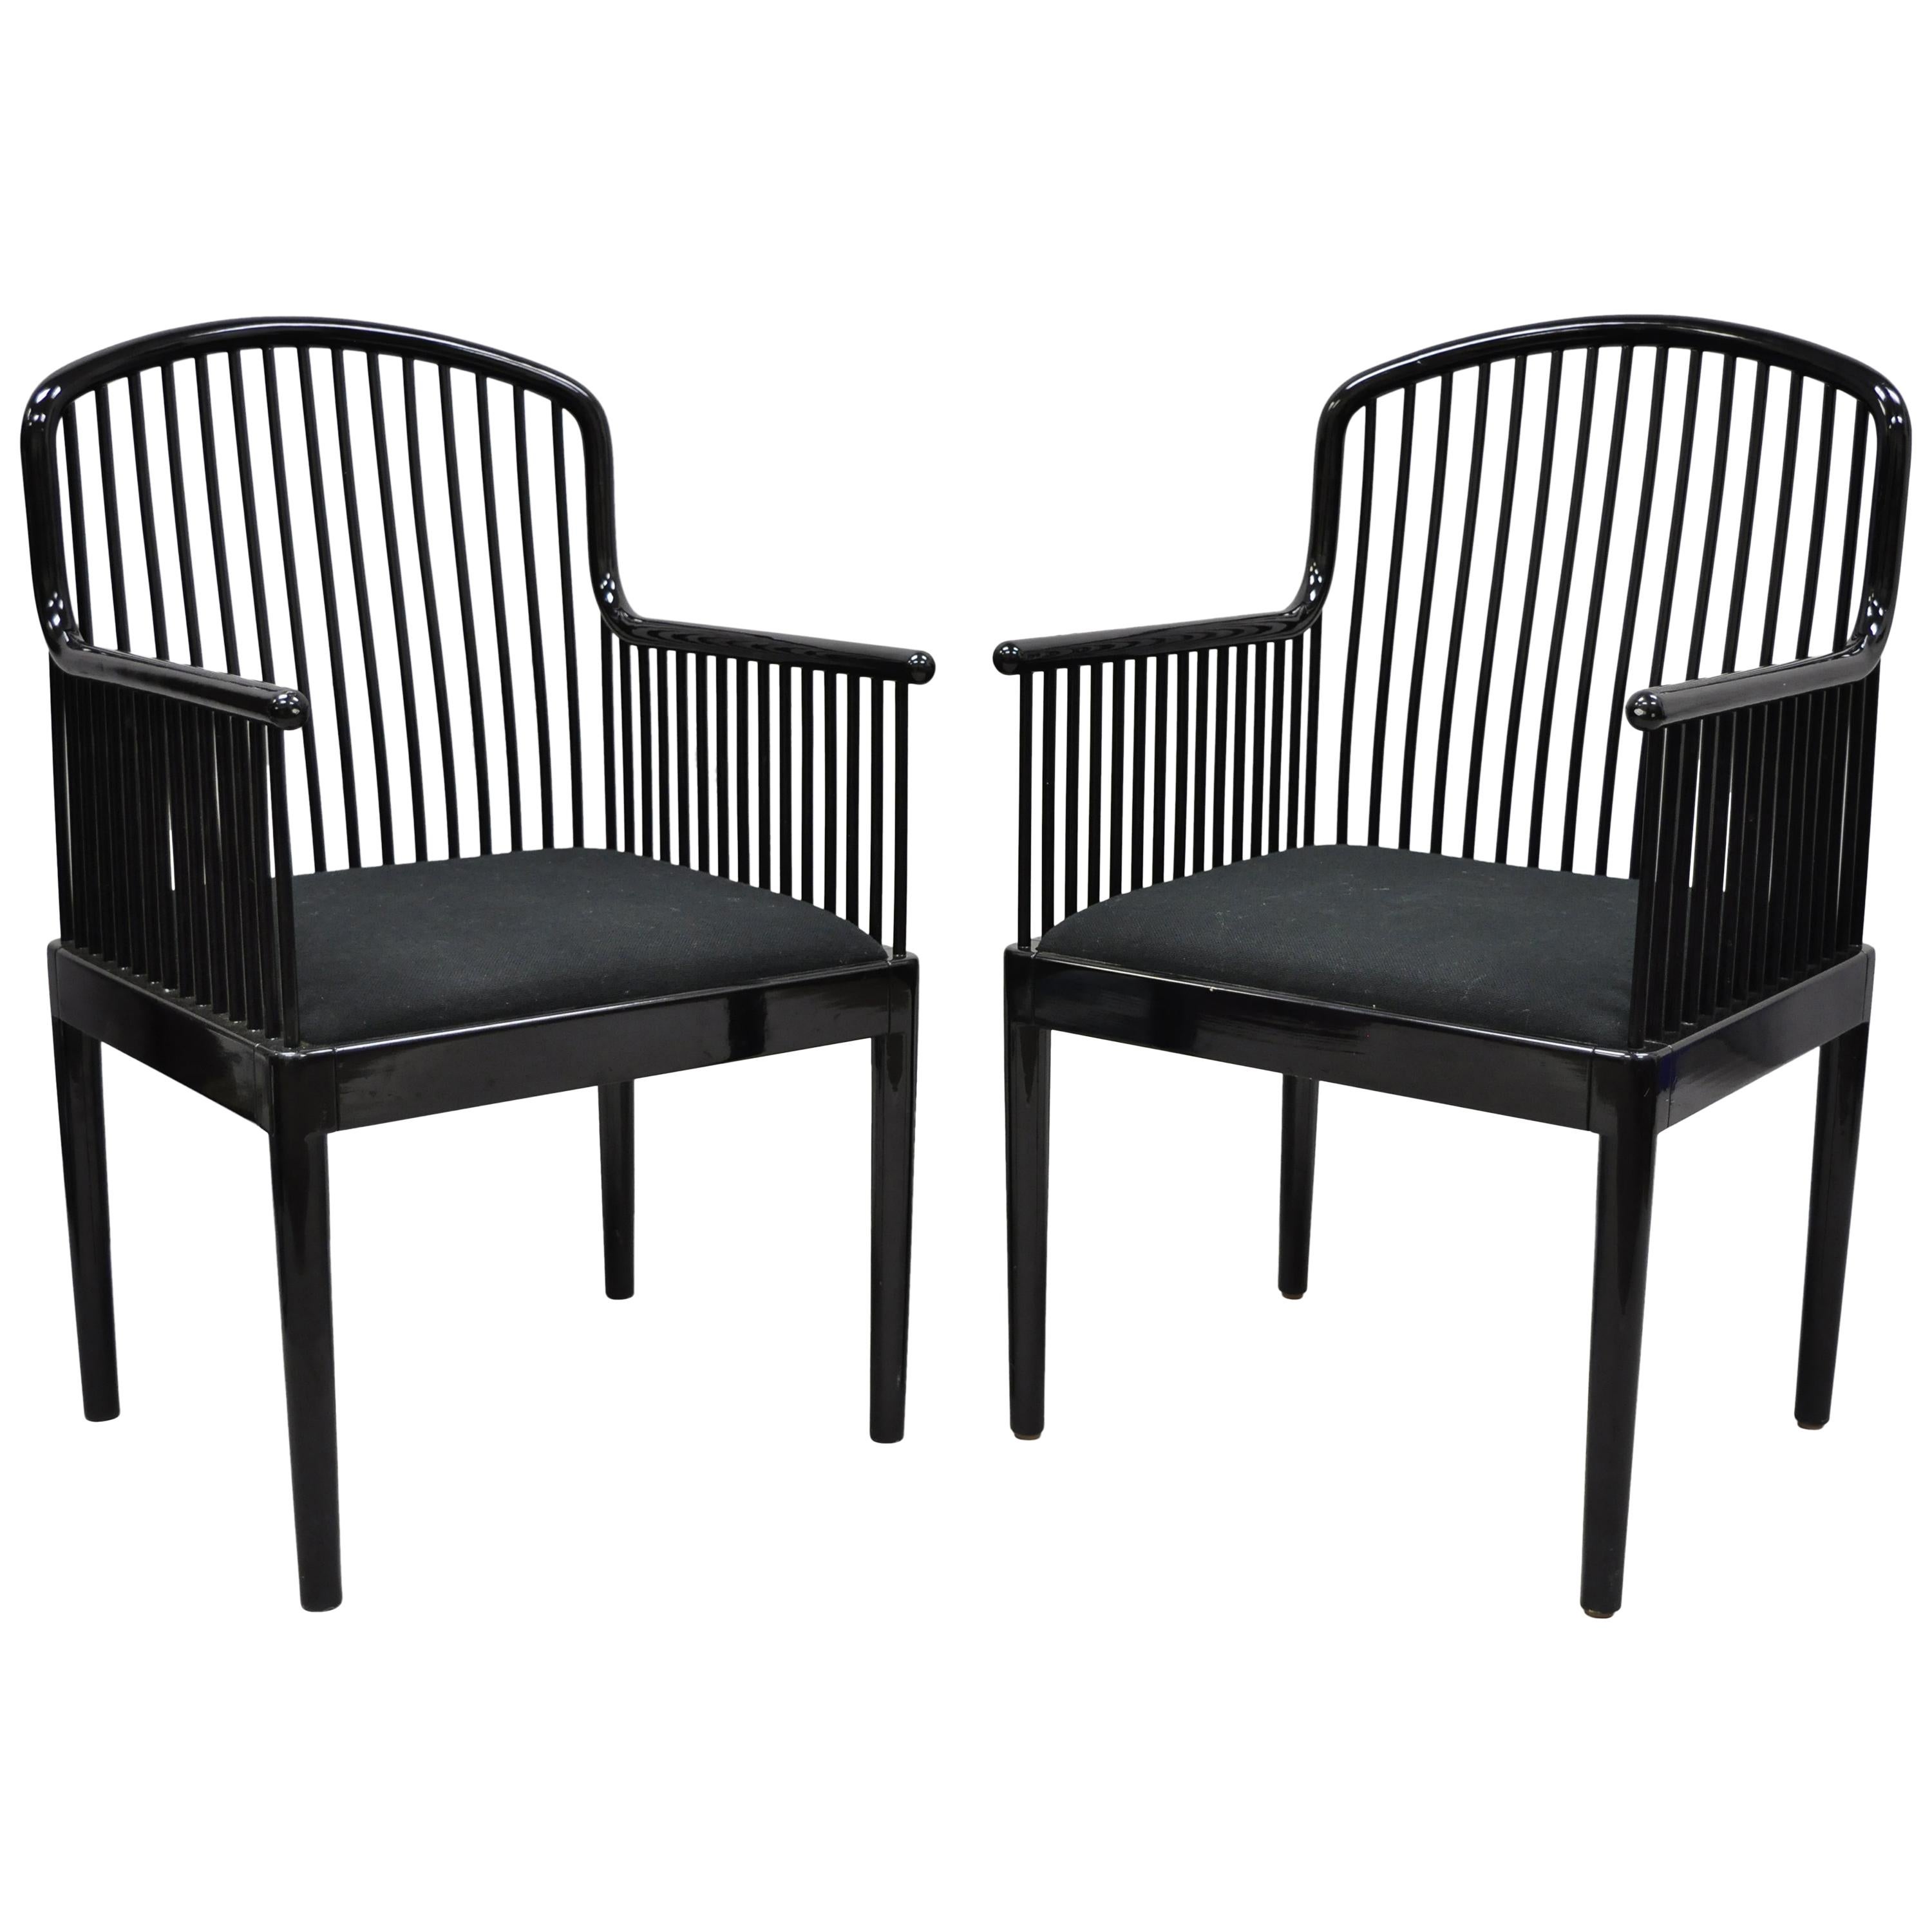 Pair of Black Lacquer Modern Andover Armchairs by Davis Allen for Stendig 'B'